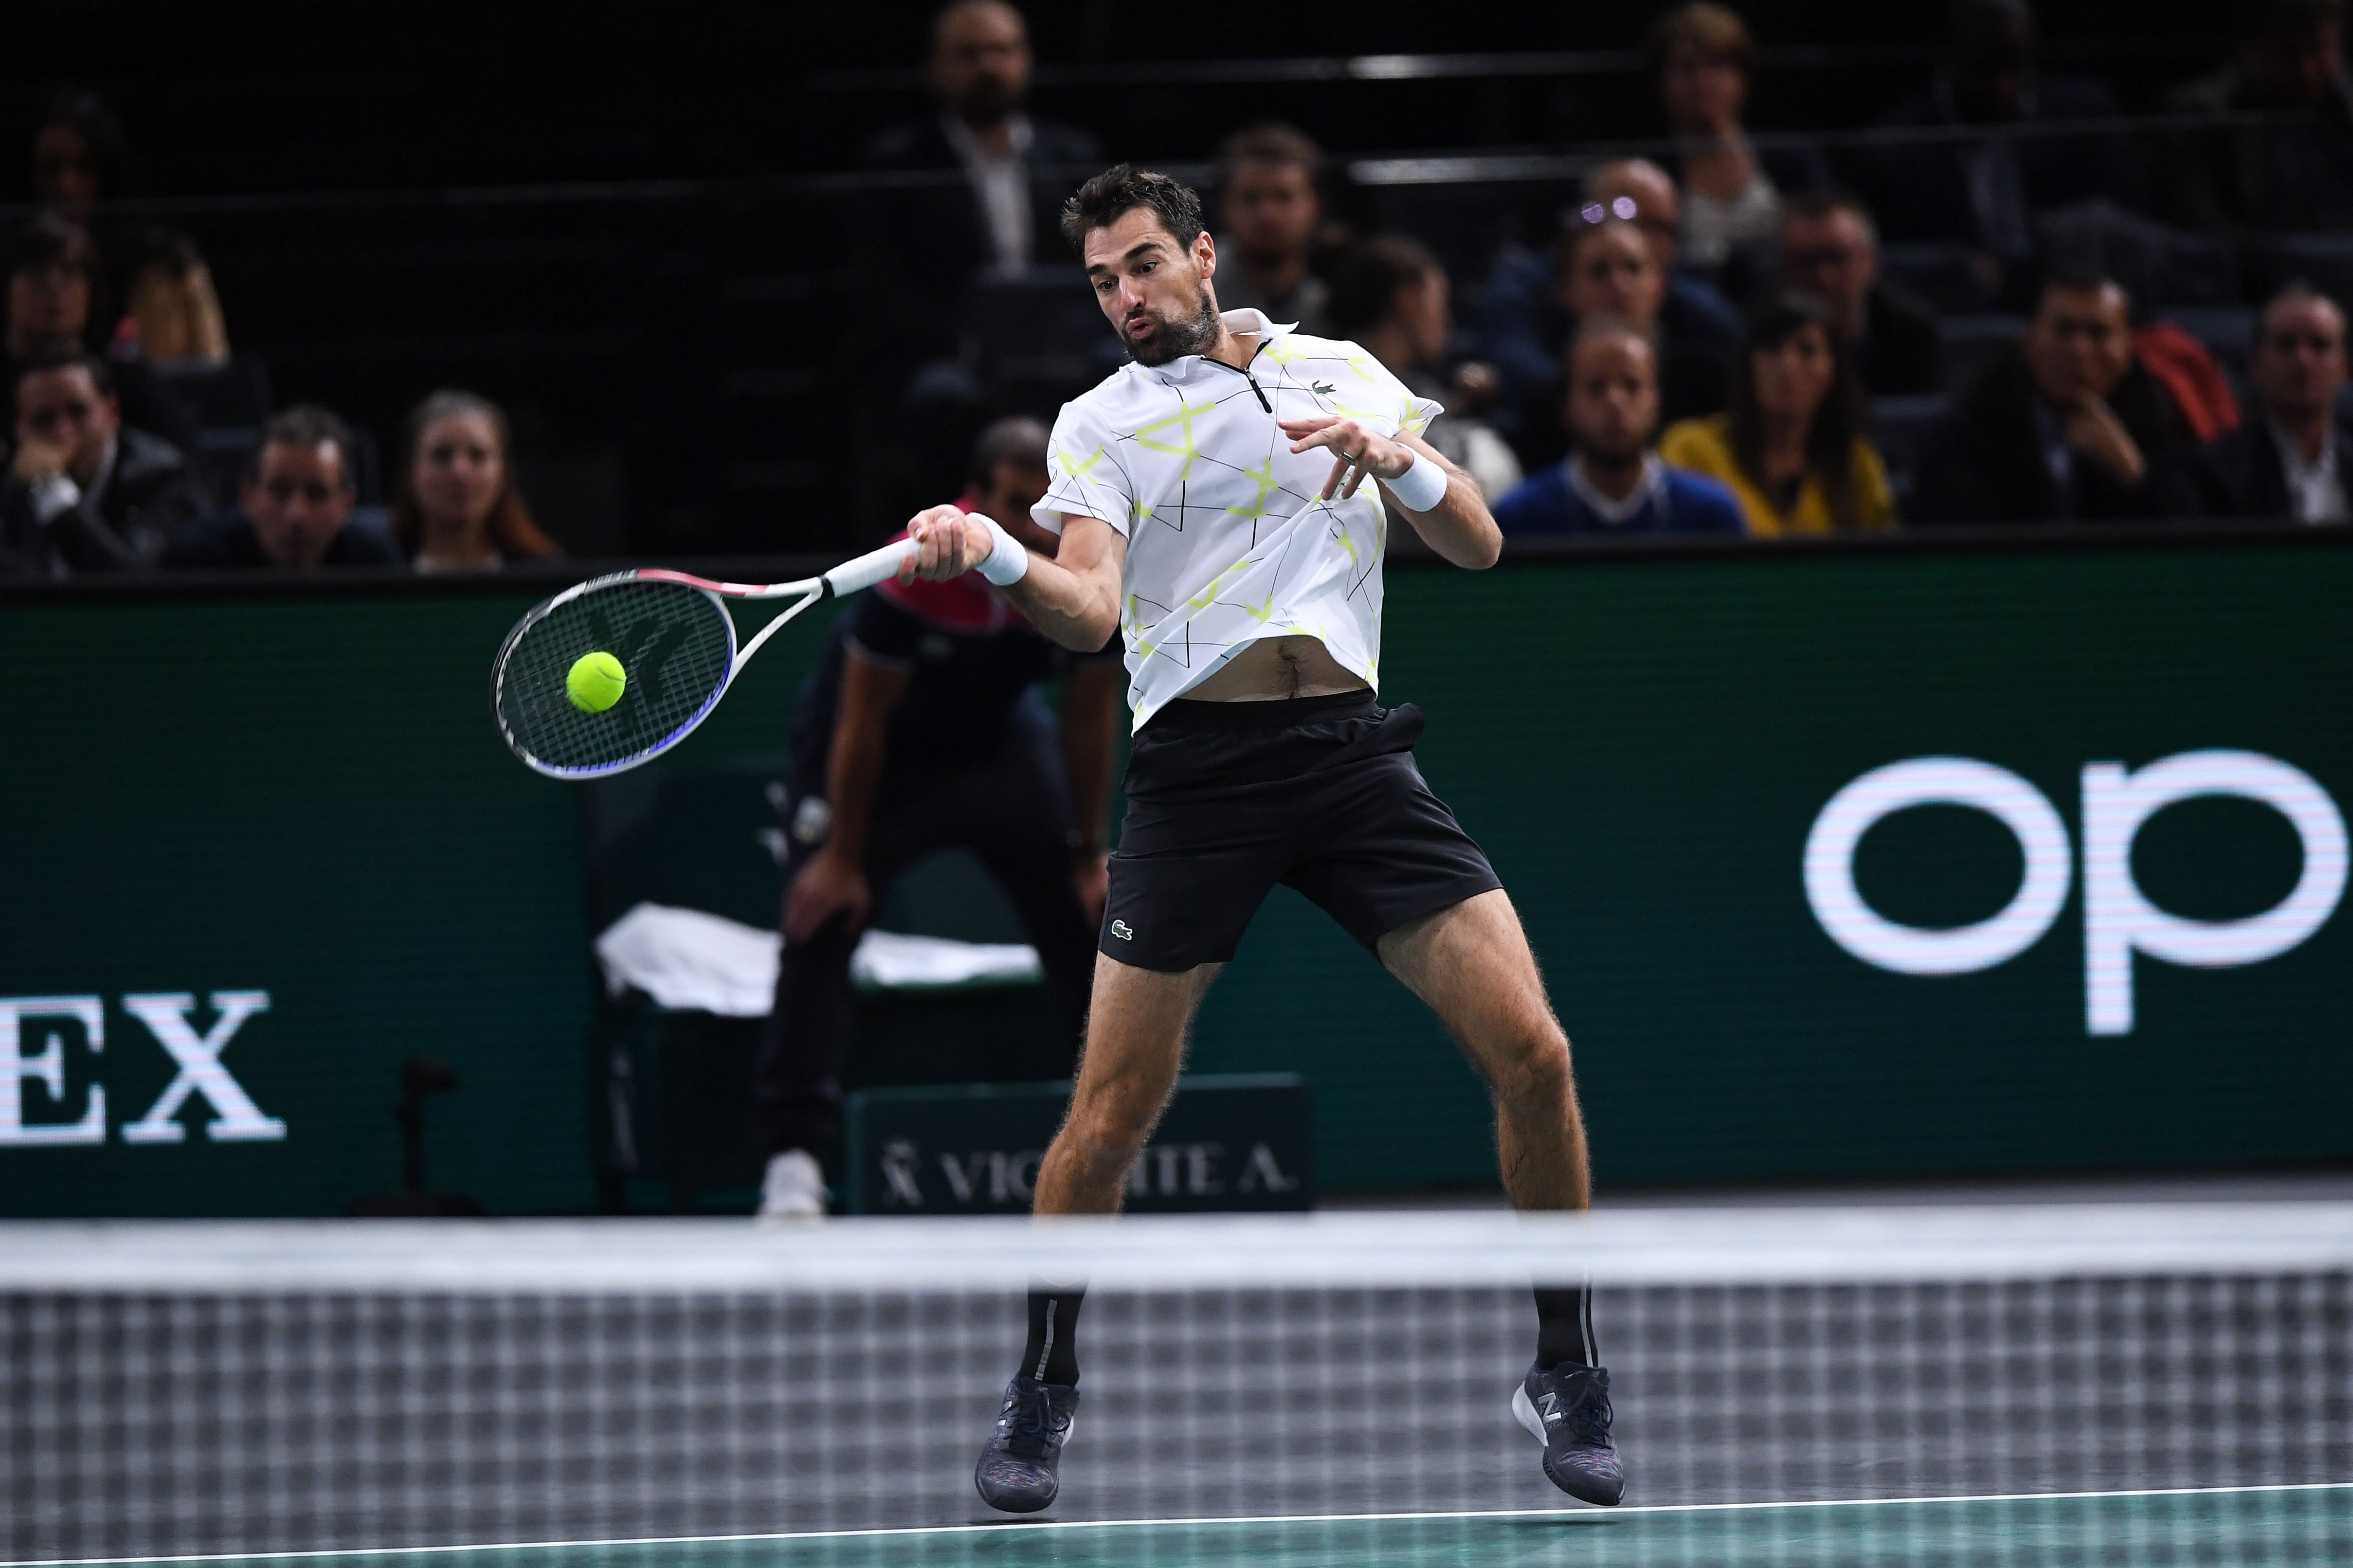 France's Jeremy Chardy returns the ball to Russia's Daniil Medvedev during their men's singles tennis match on day two of the ATP World Tour Masters 1000 - Rolex Paris Masters - indoor tennis tournament at The AccorHotels Arena in Paris. (AFP Photo)